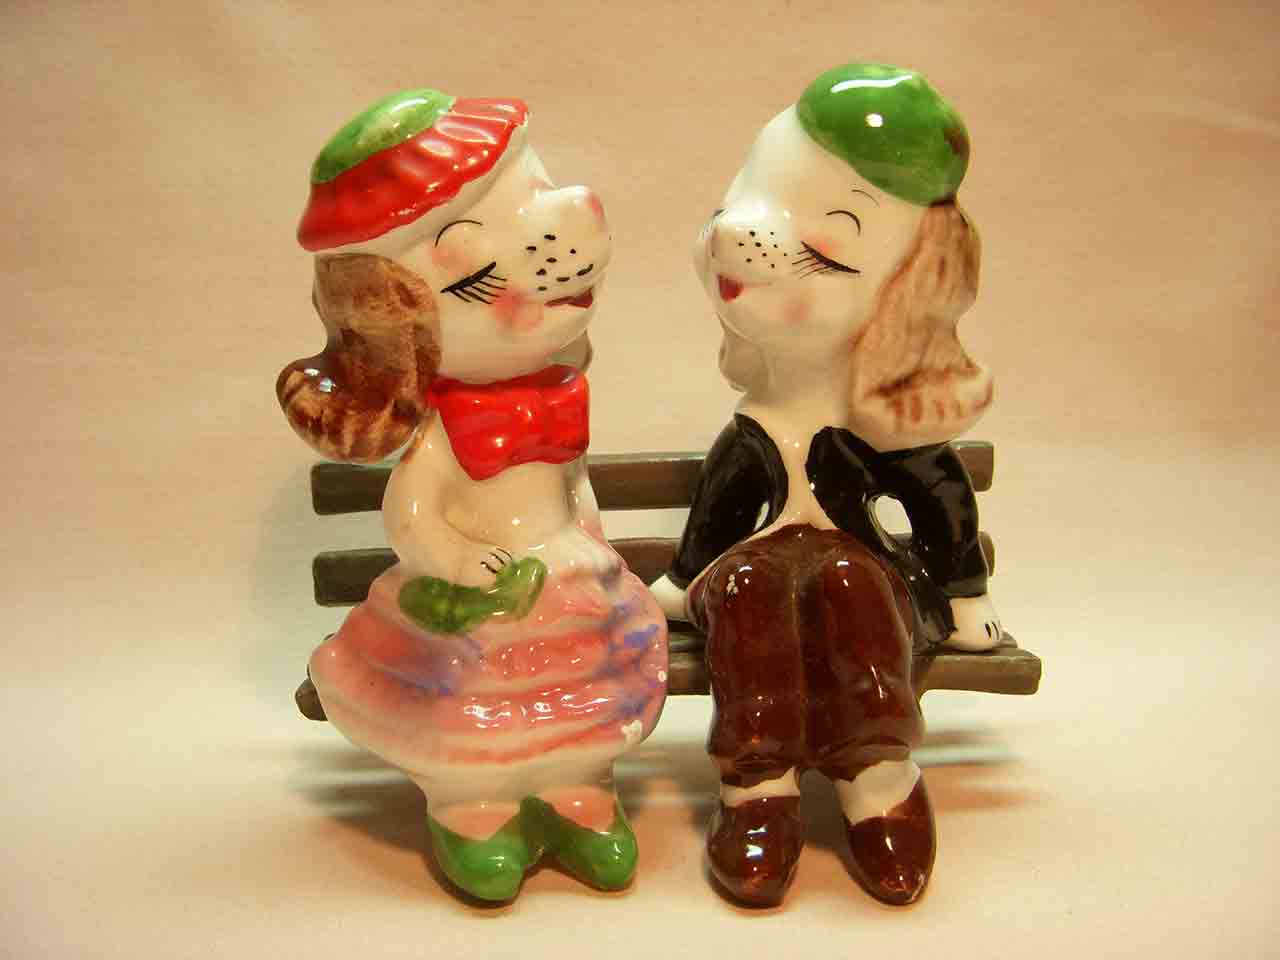 Dog couple bench sitters on wooden bench salt and pepper shaker